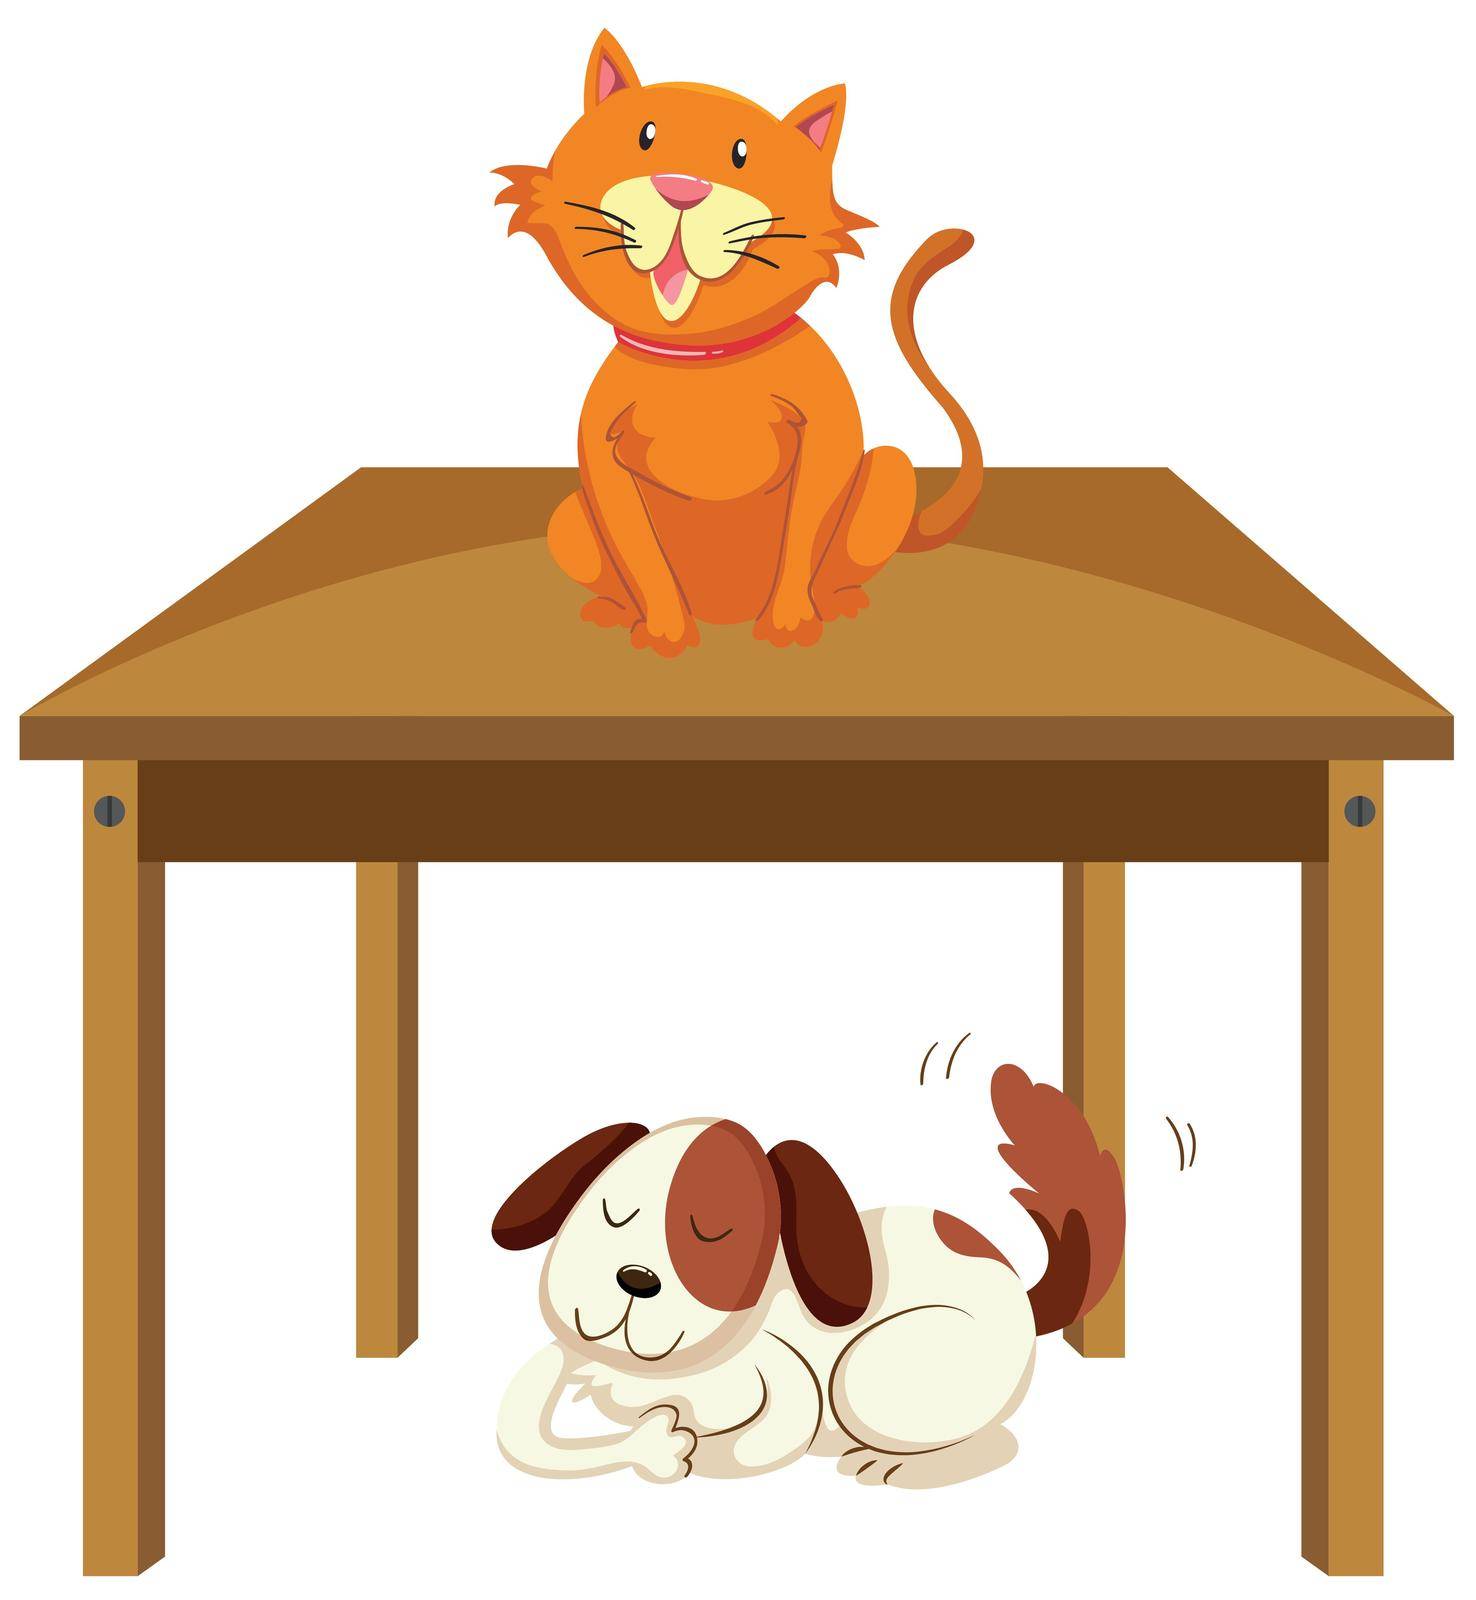 Cat on the table and dog under the table illustration